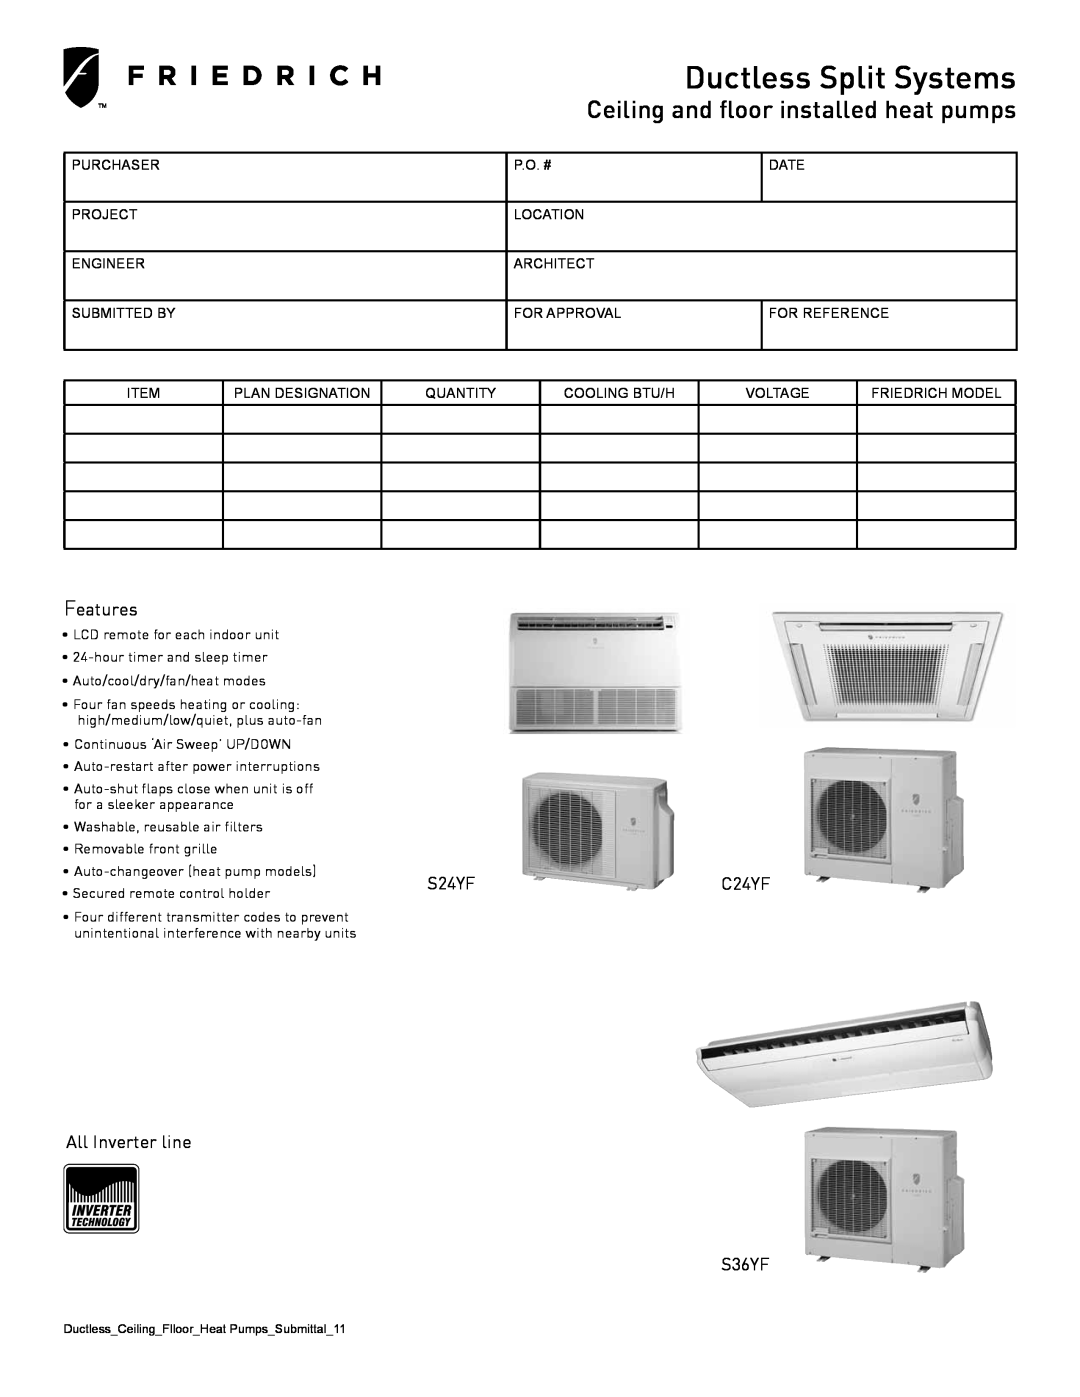 Friedrich C24YF, S36YF manual Ductless Split Systems, Ceiling and floor installed heat pumps, Features, S24YF 